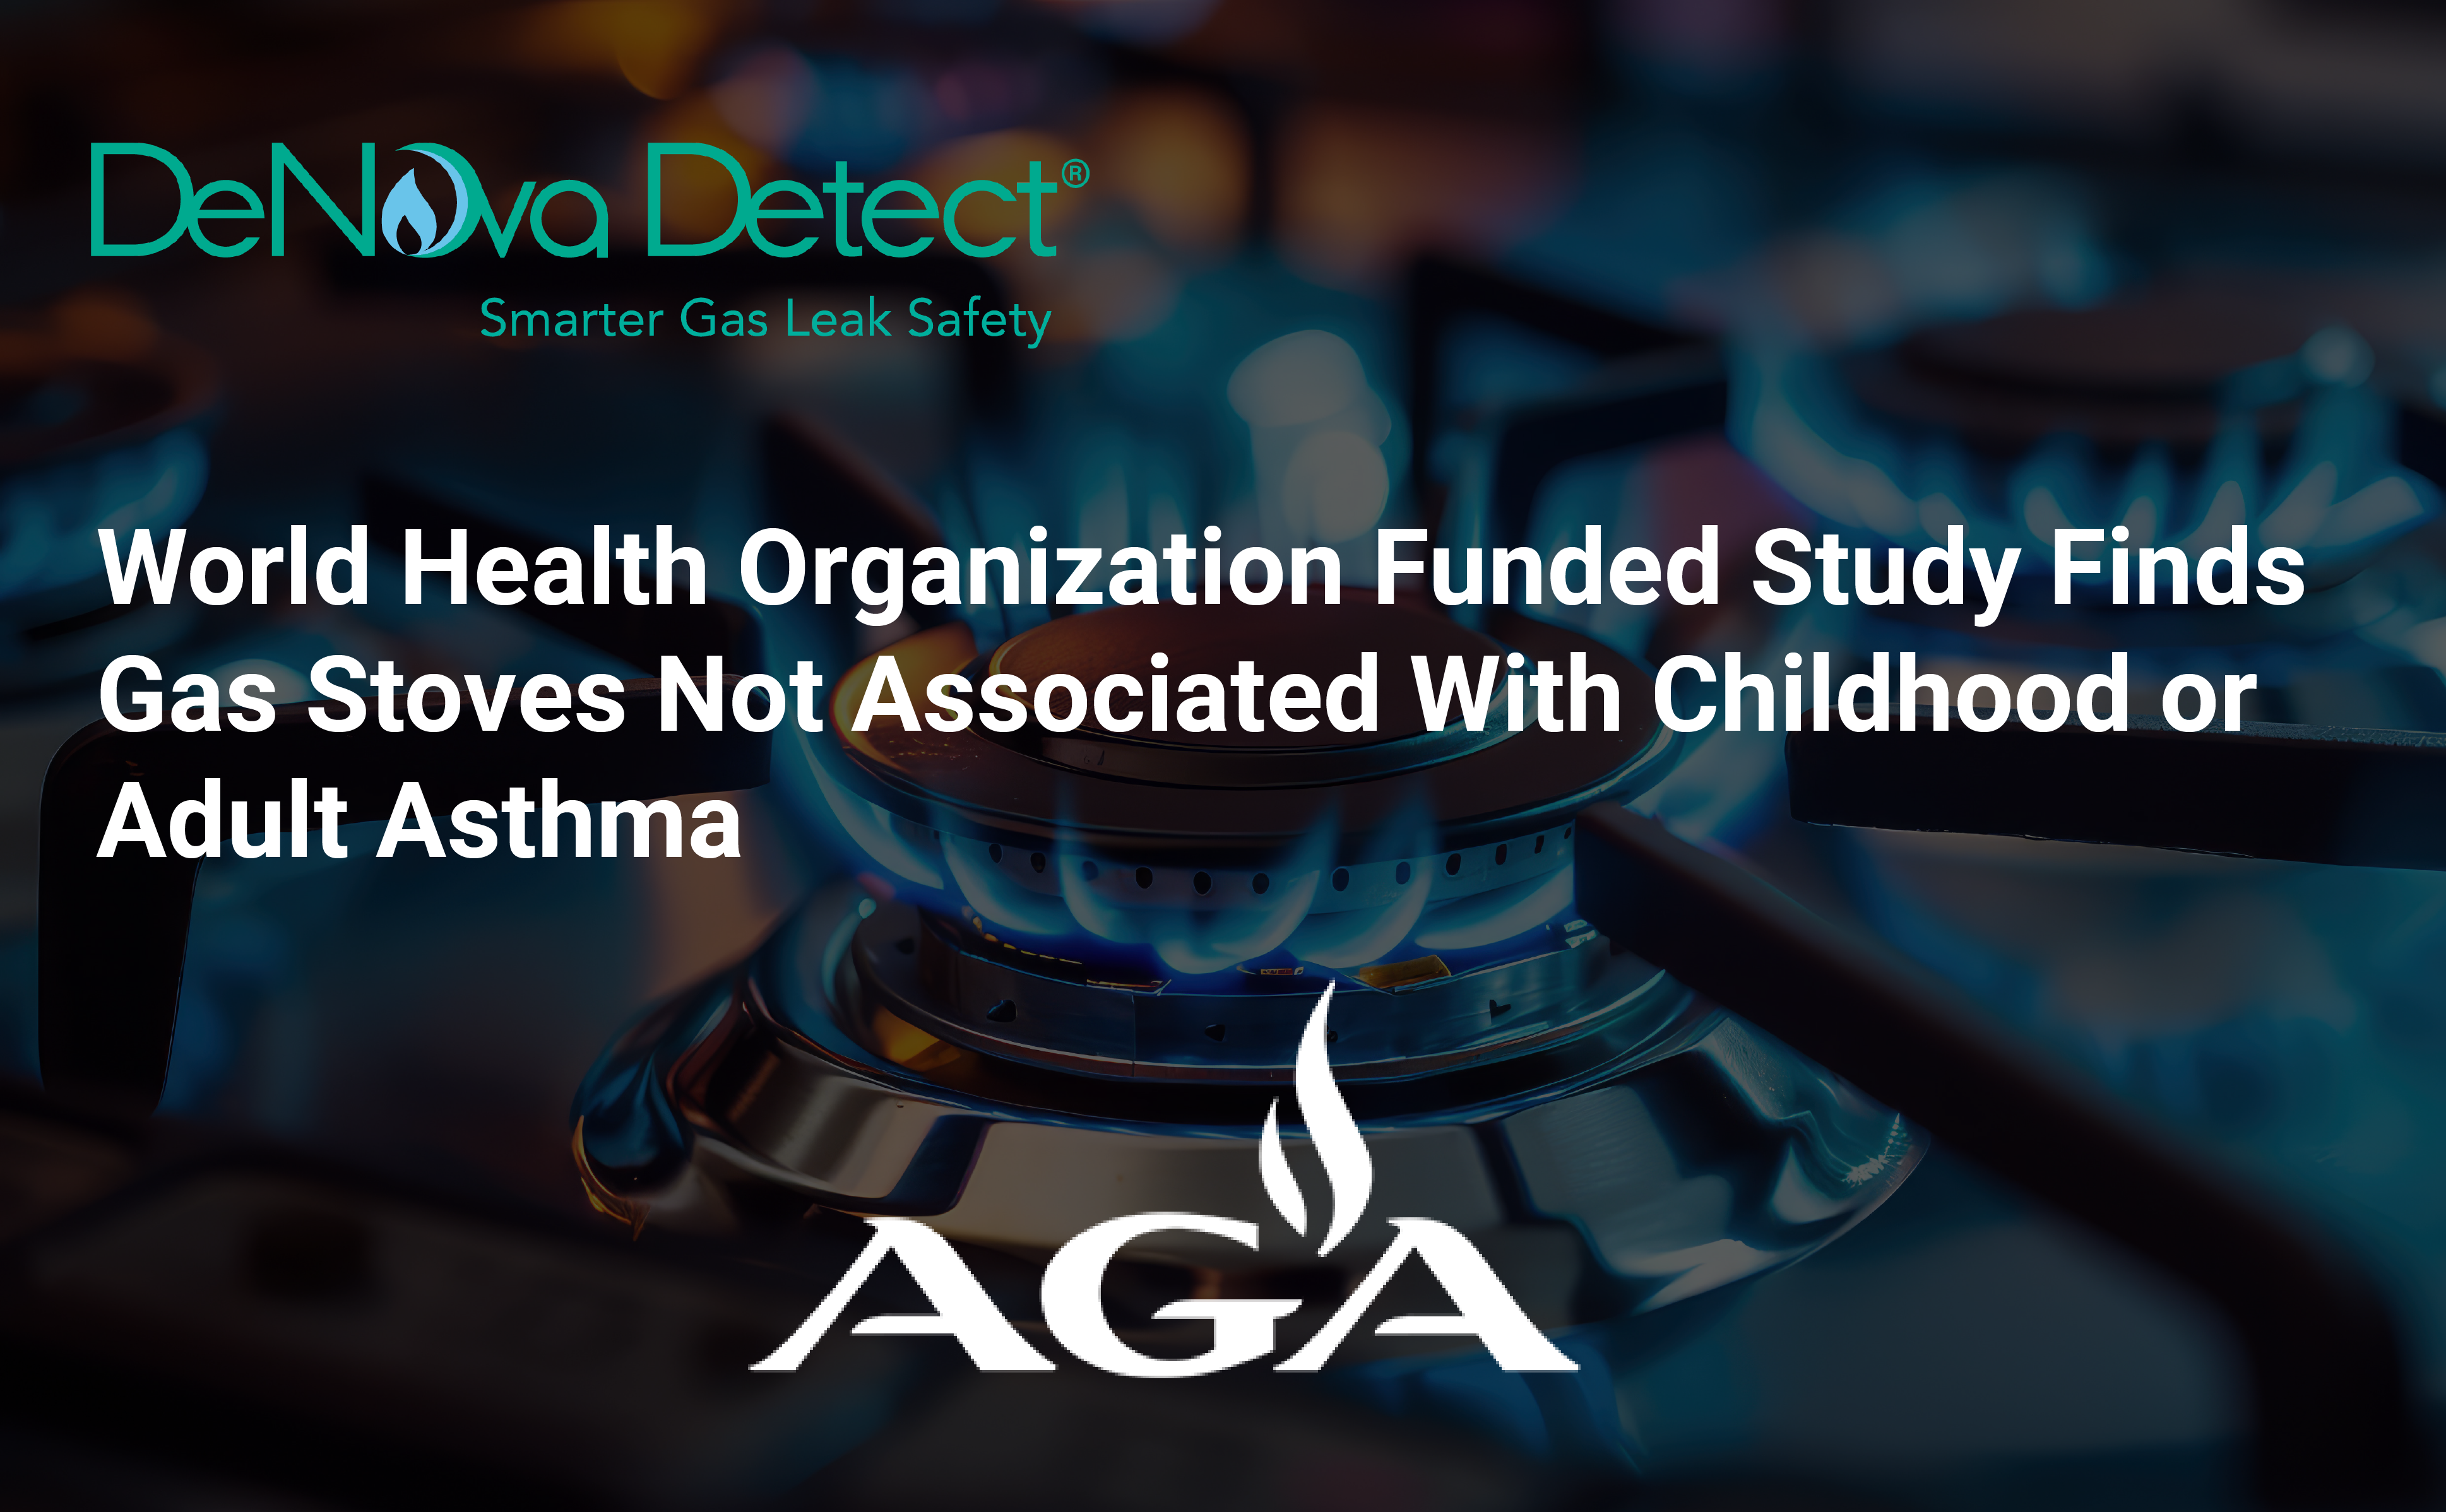 World Health Organization Funded Study Finds Gas Stoves Not Associated With Childhood or Adult Asthma